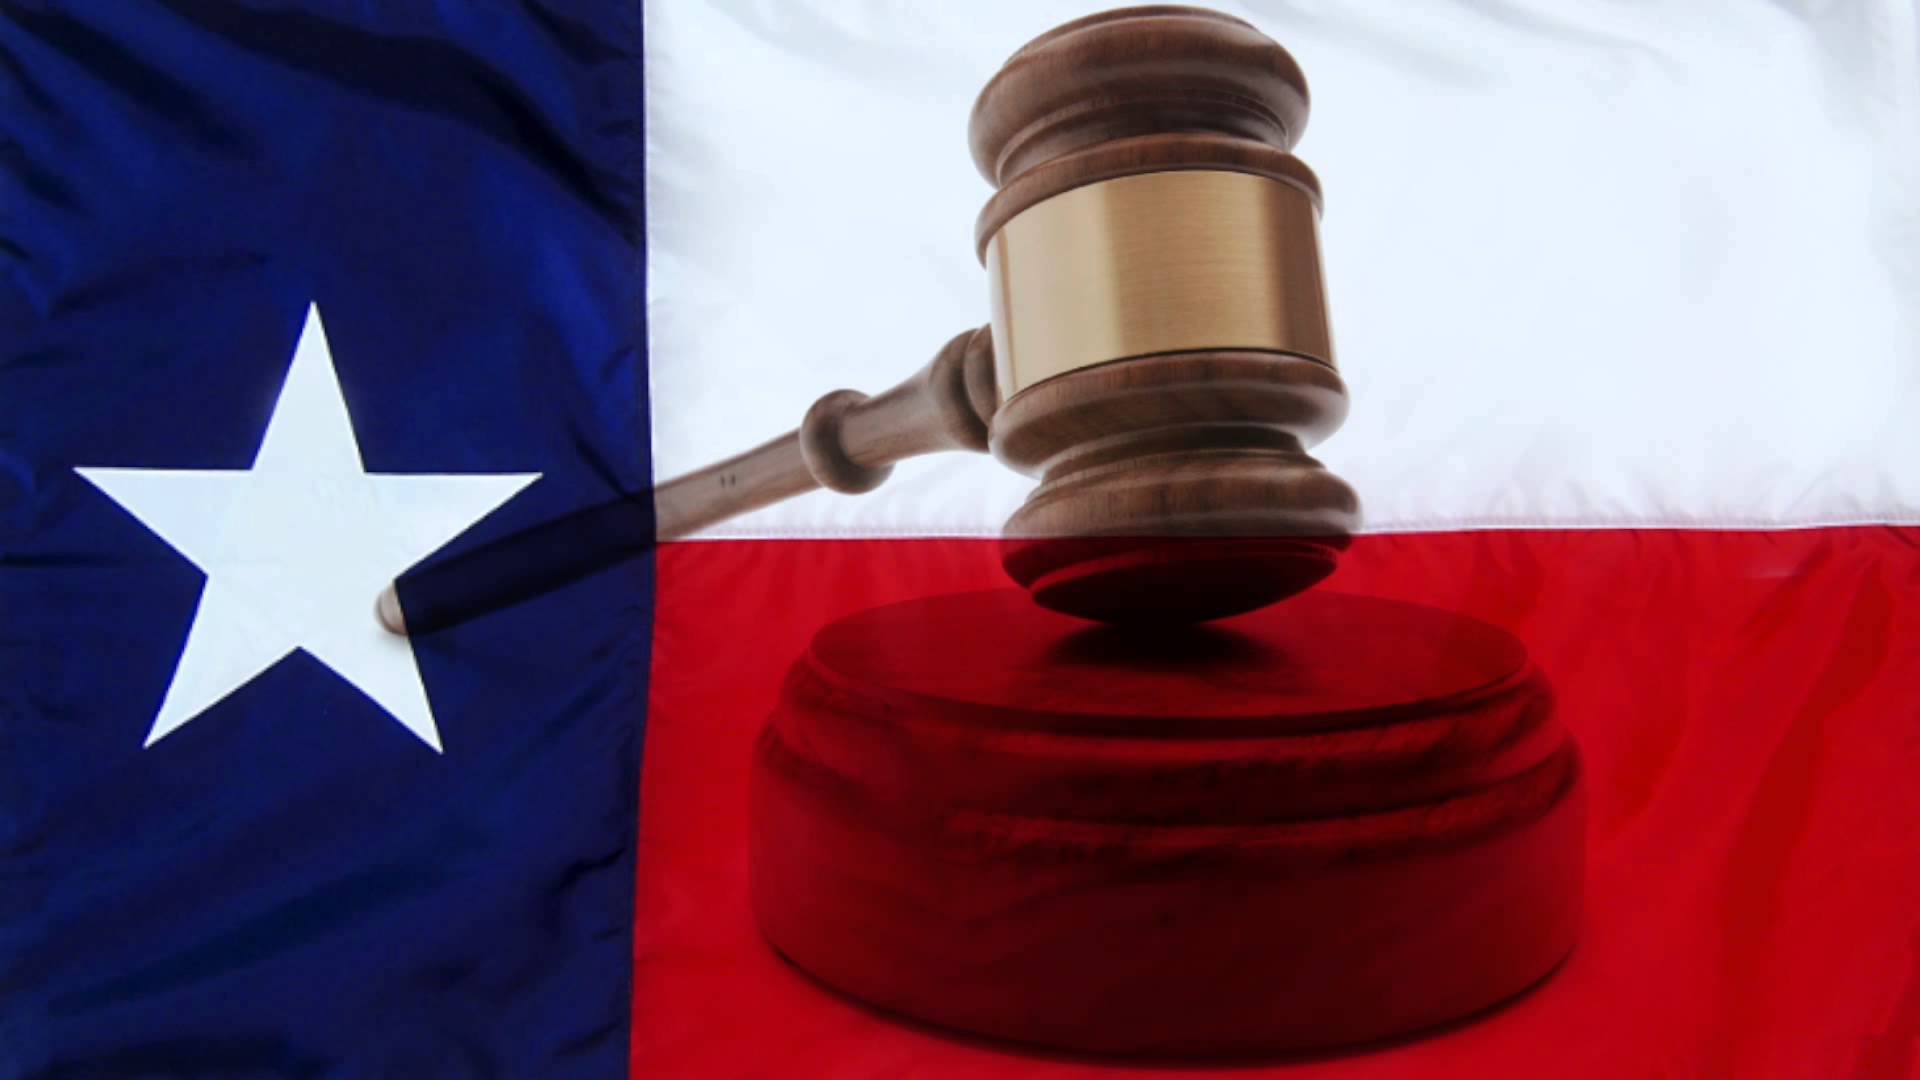 Texas Fathers Rights to Establish Paternity of Children Born Out of Wedlock